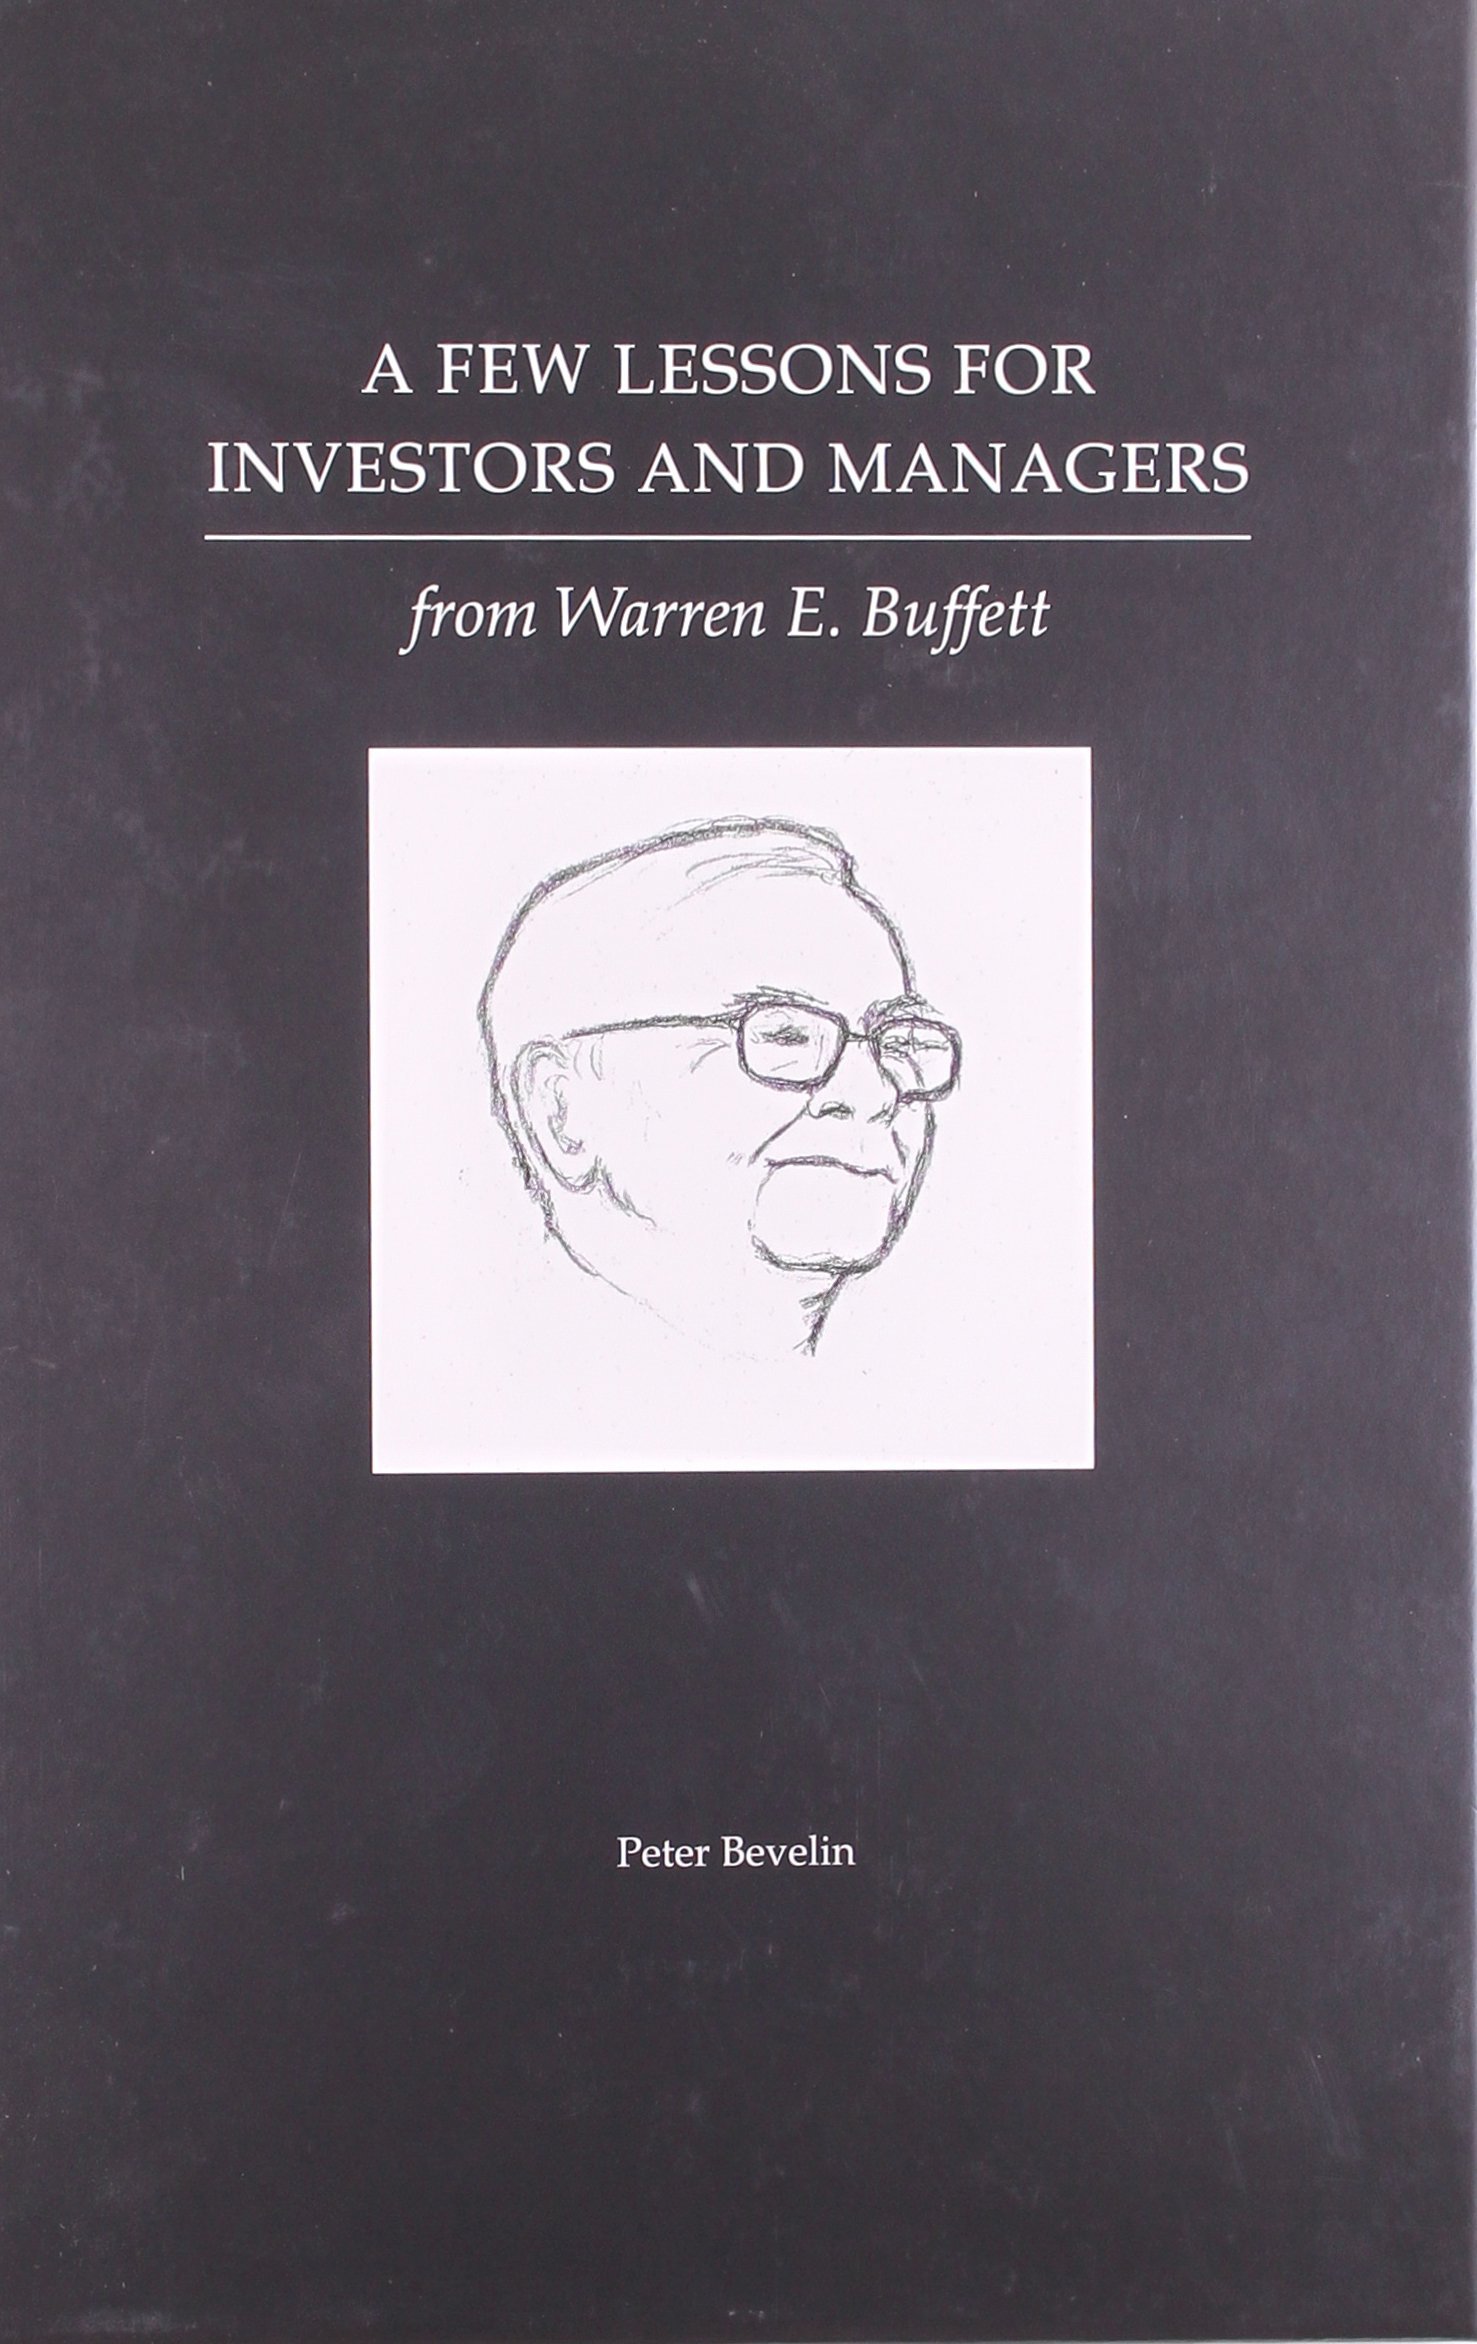 A few lessons for investors and managers